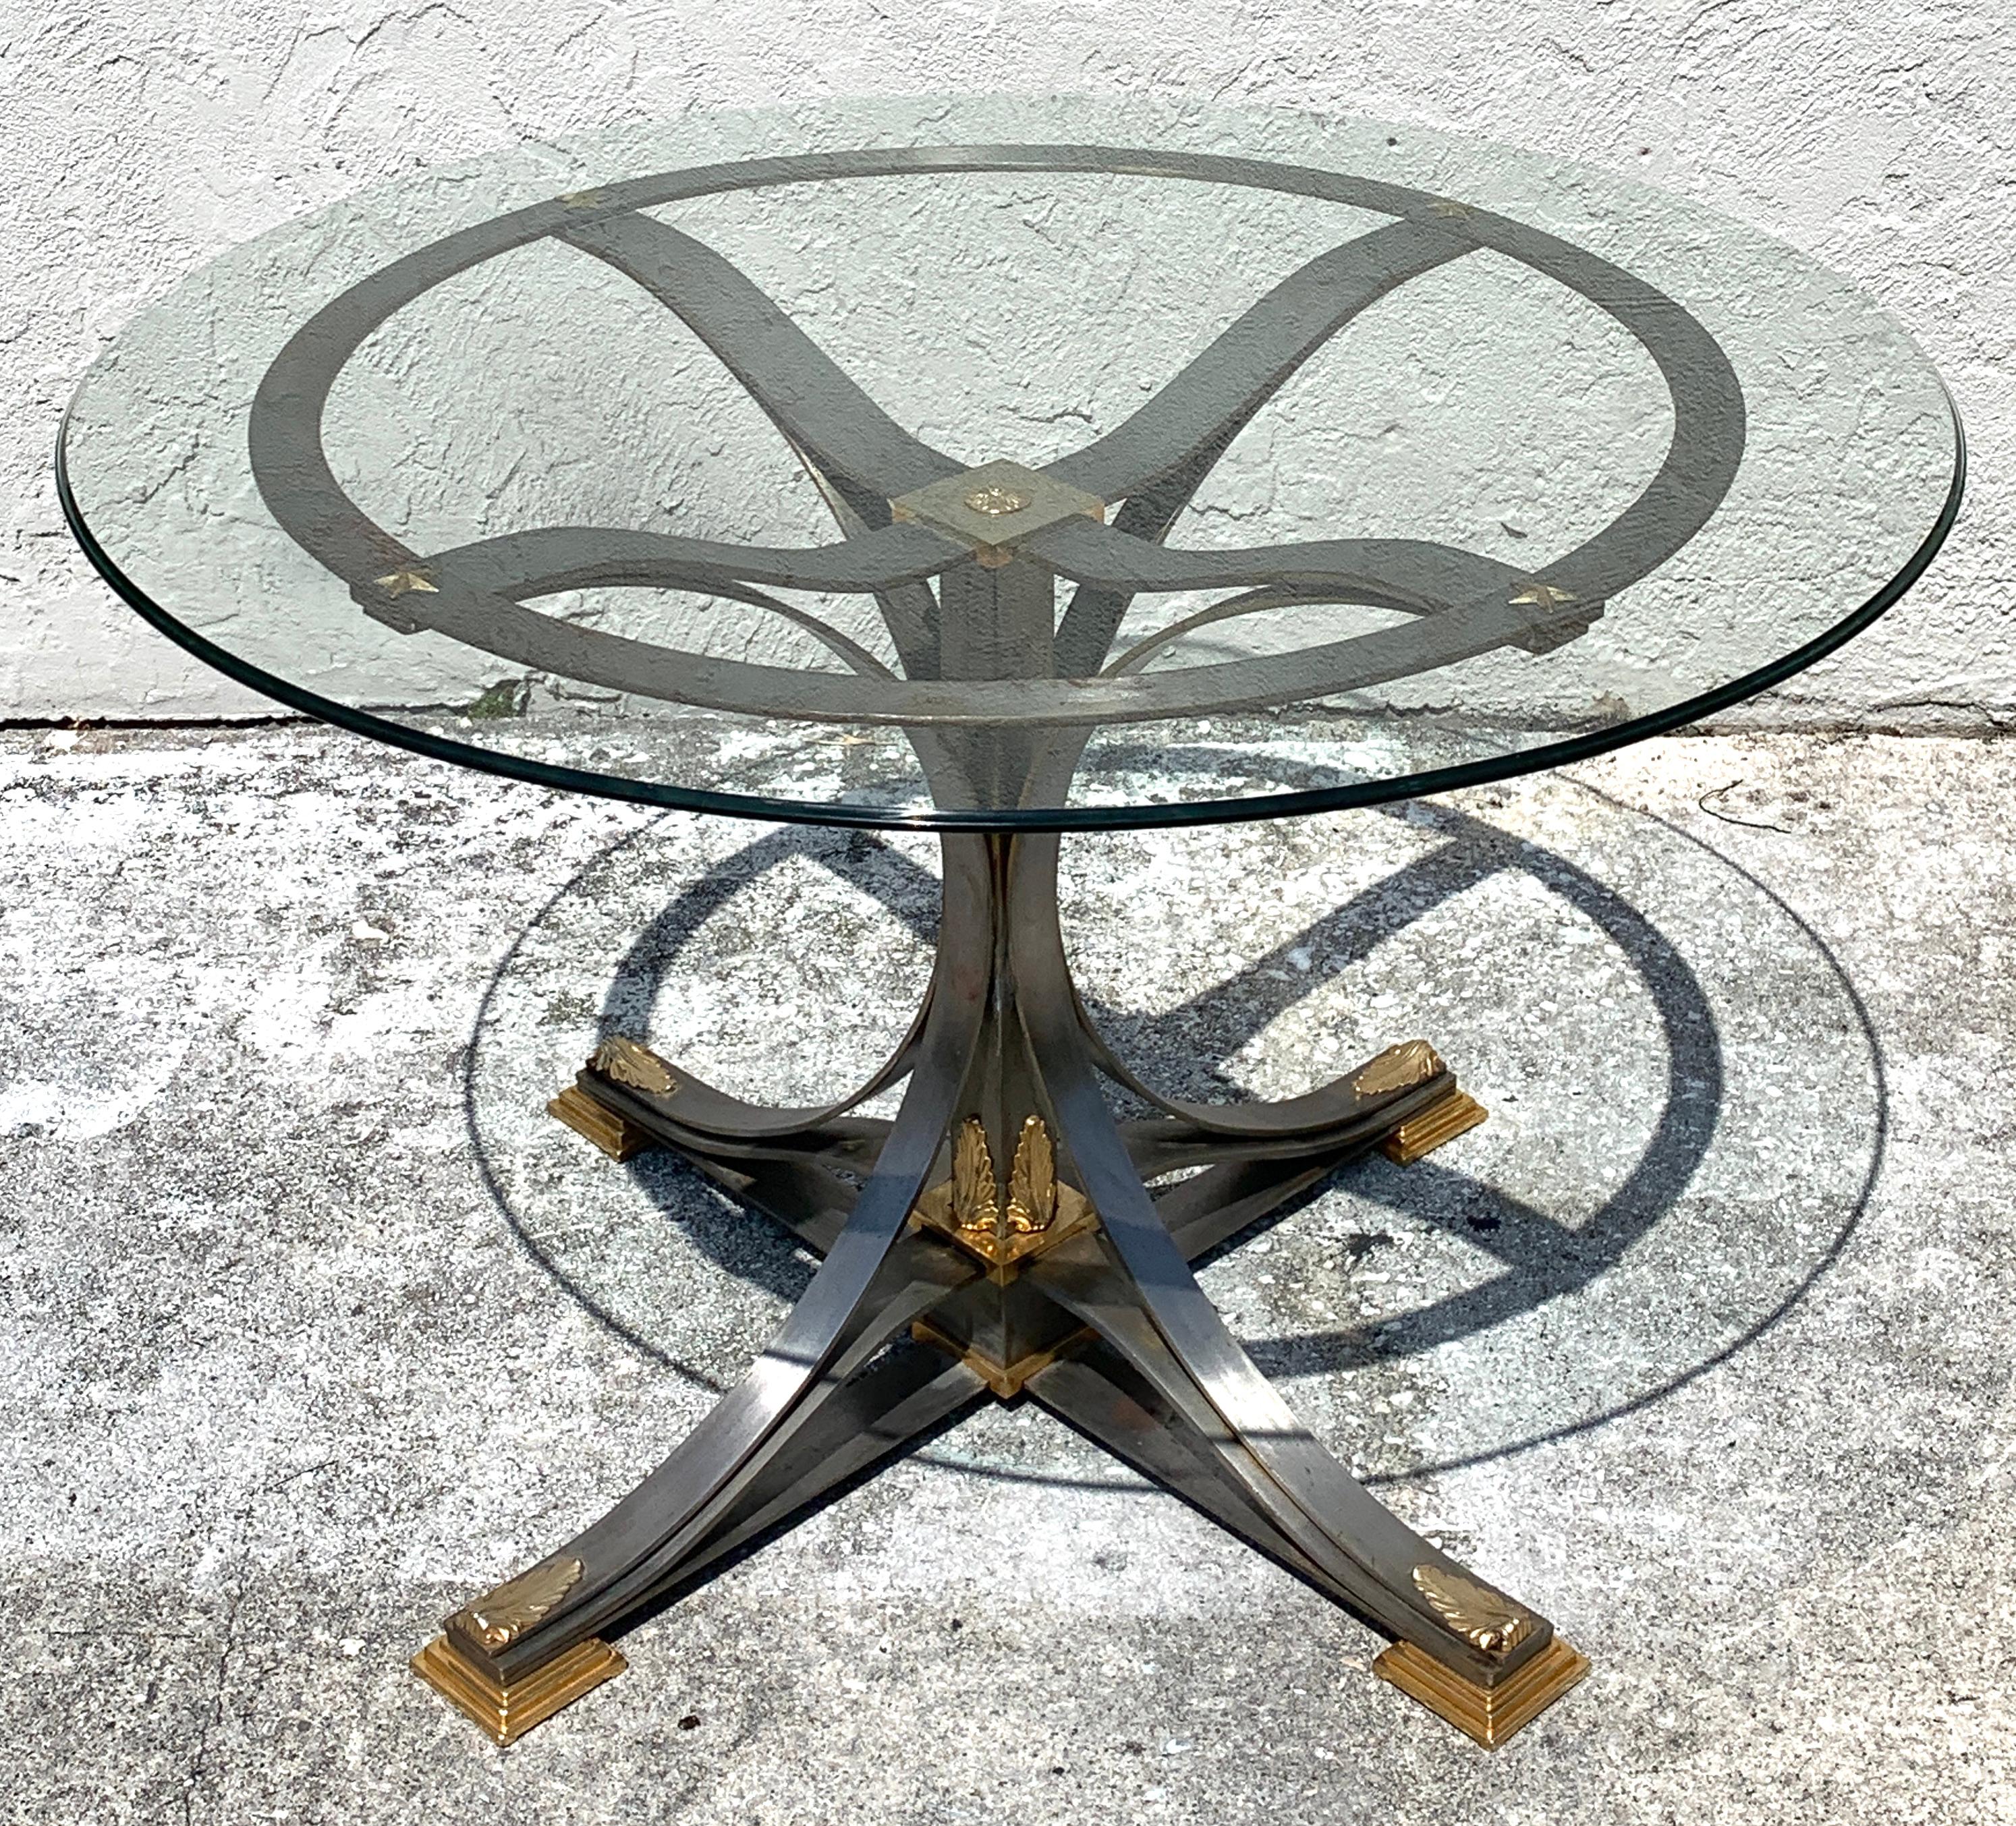 Neoclassical steel and gilt bronze table in the style of Maison Jansen
Base alone measures 34